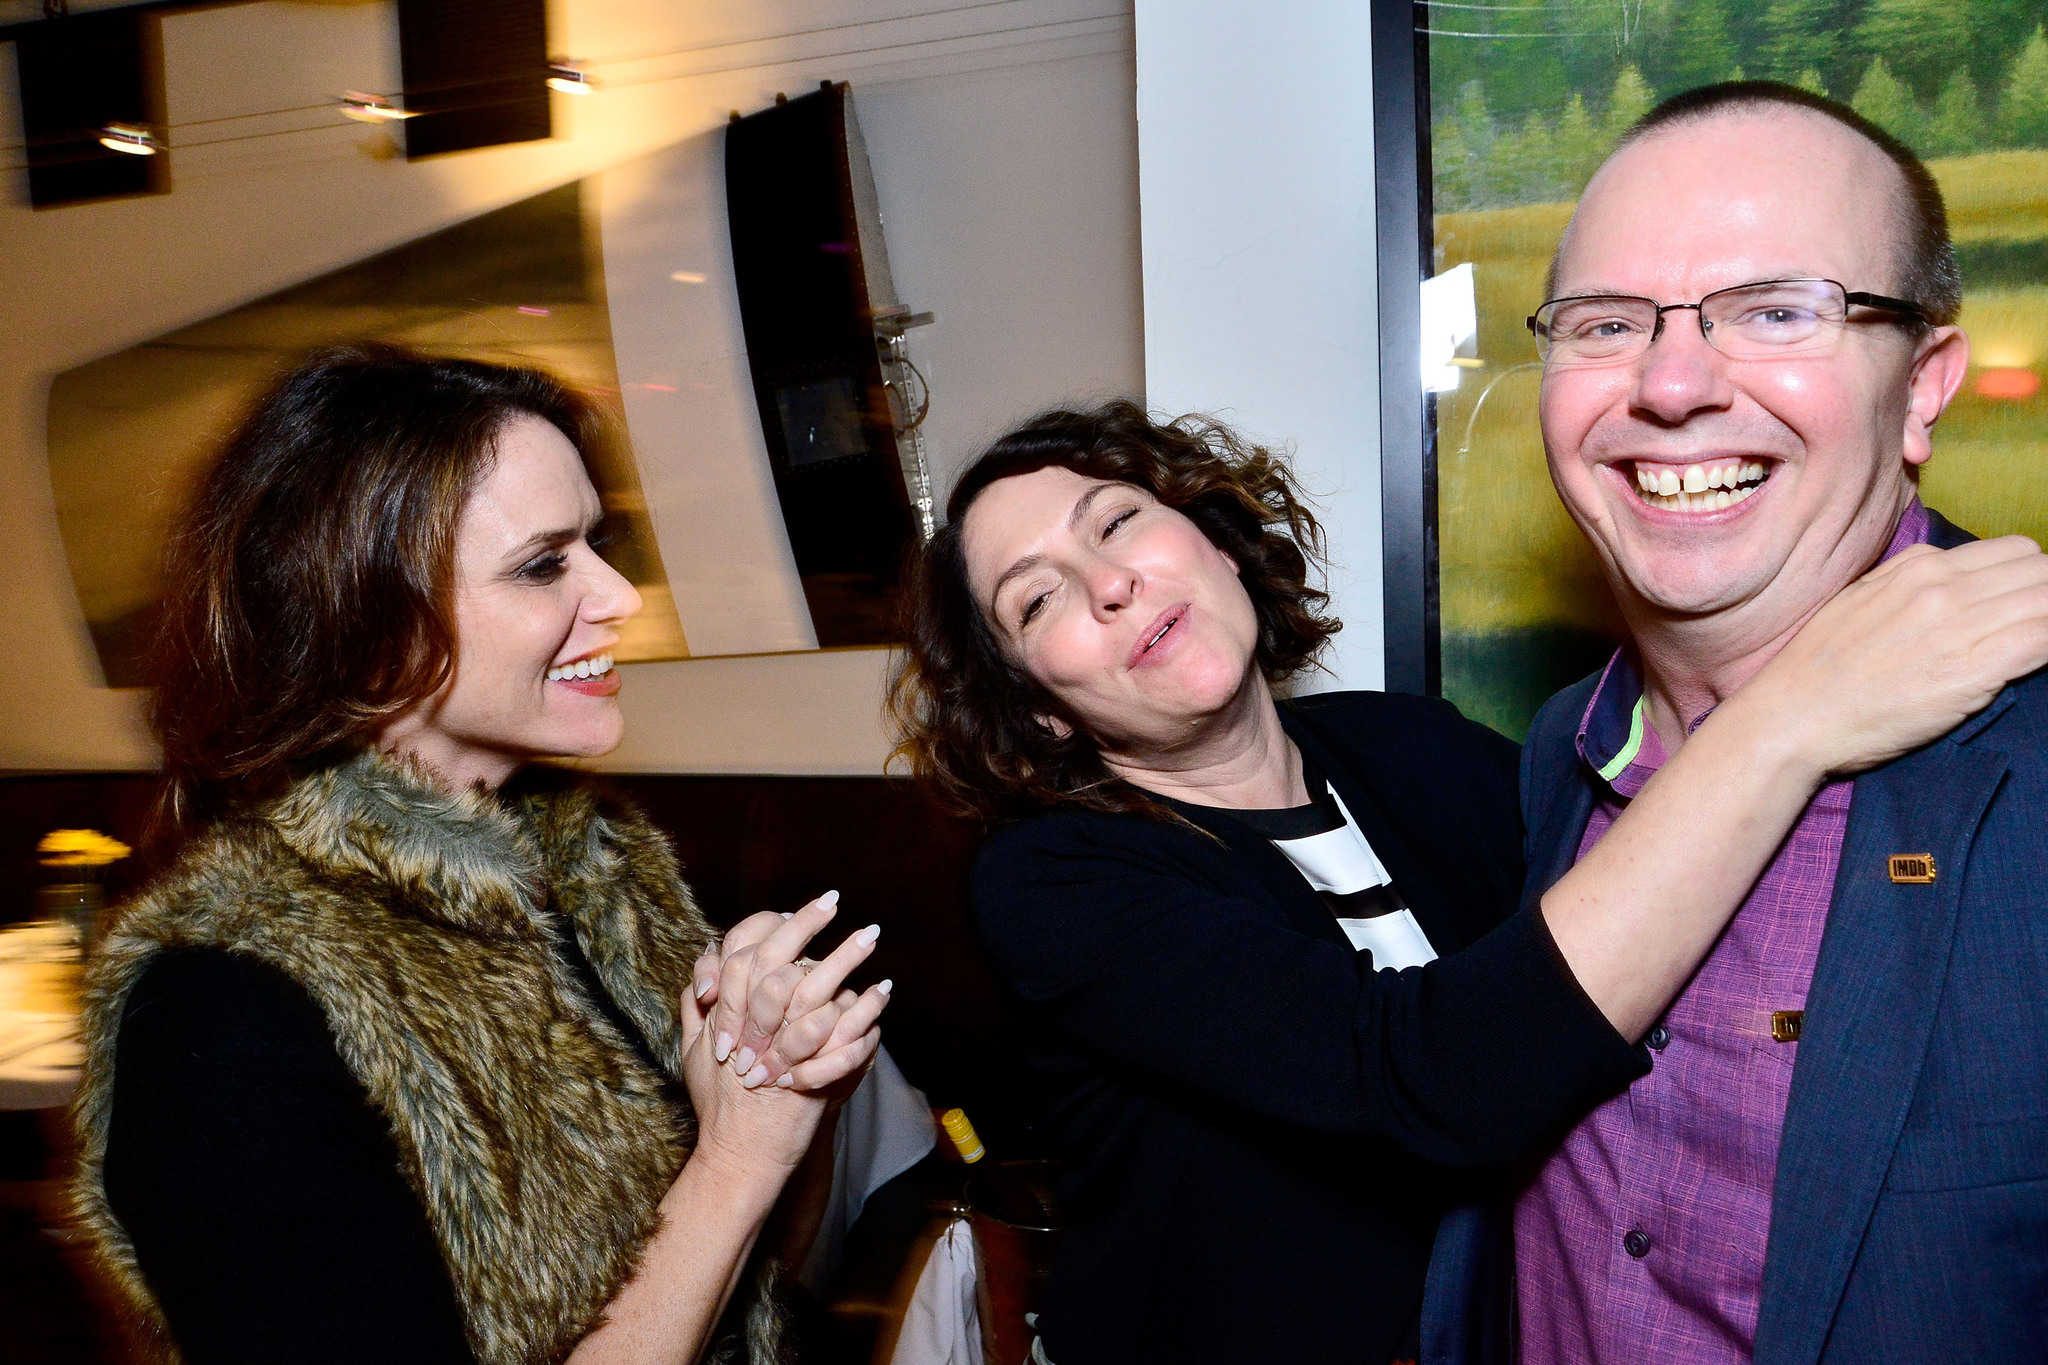 Amy Landecker, Jill Soloway and Col Needham